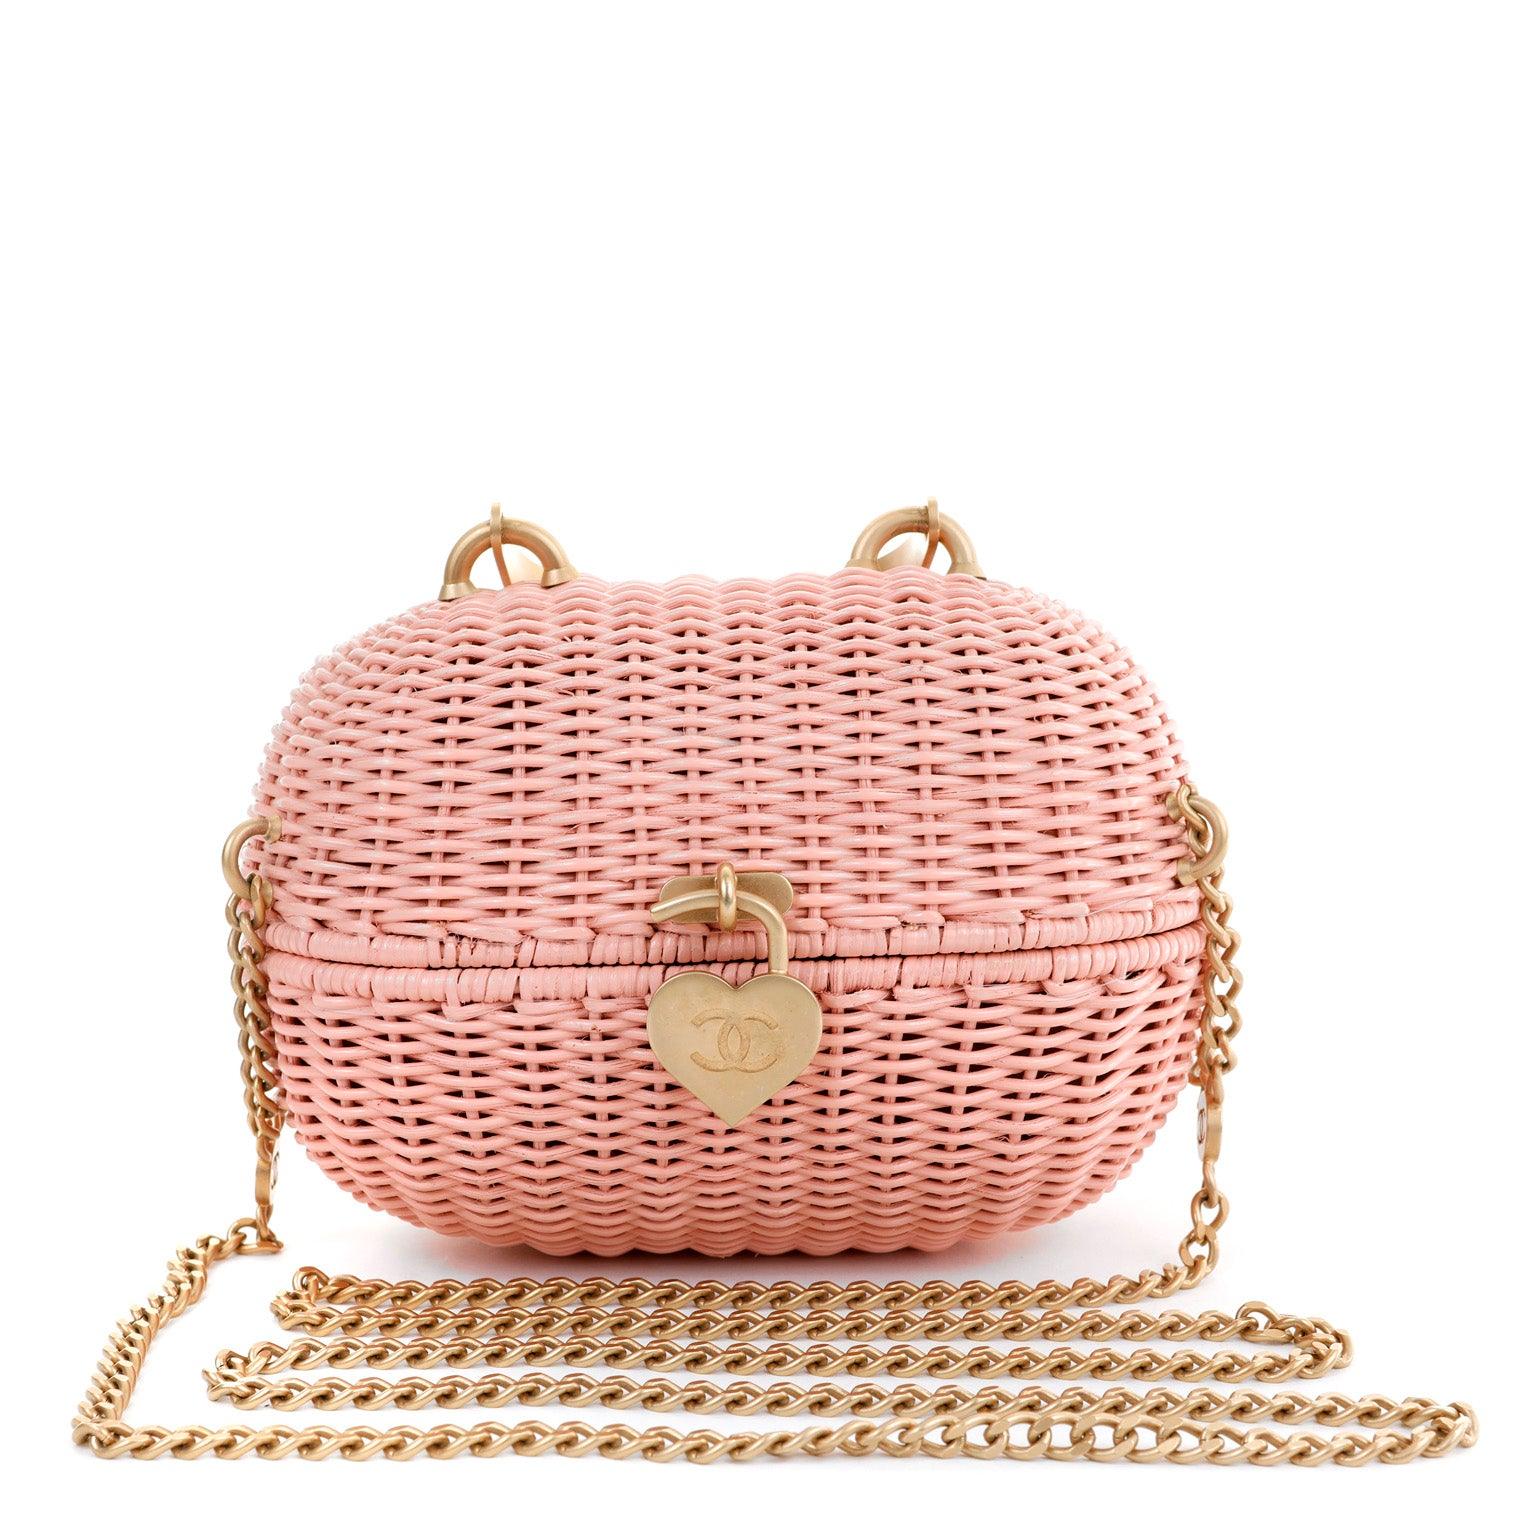 Chanel Oval Pink Basket w/ Gold Hardware Runway – Only Authentics